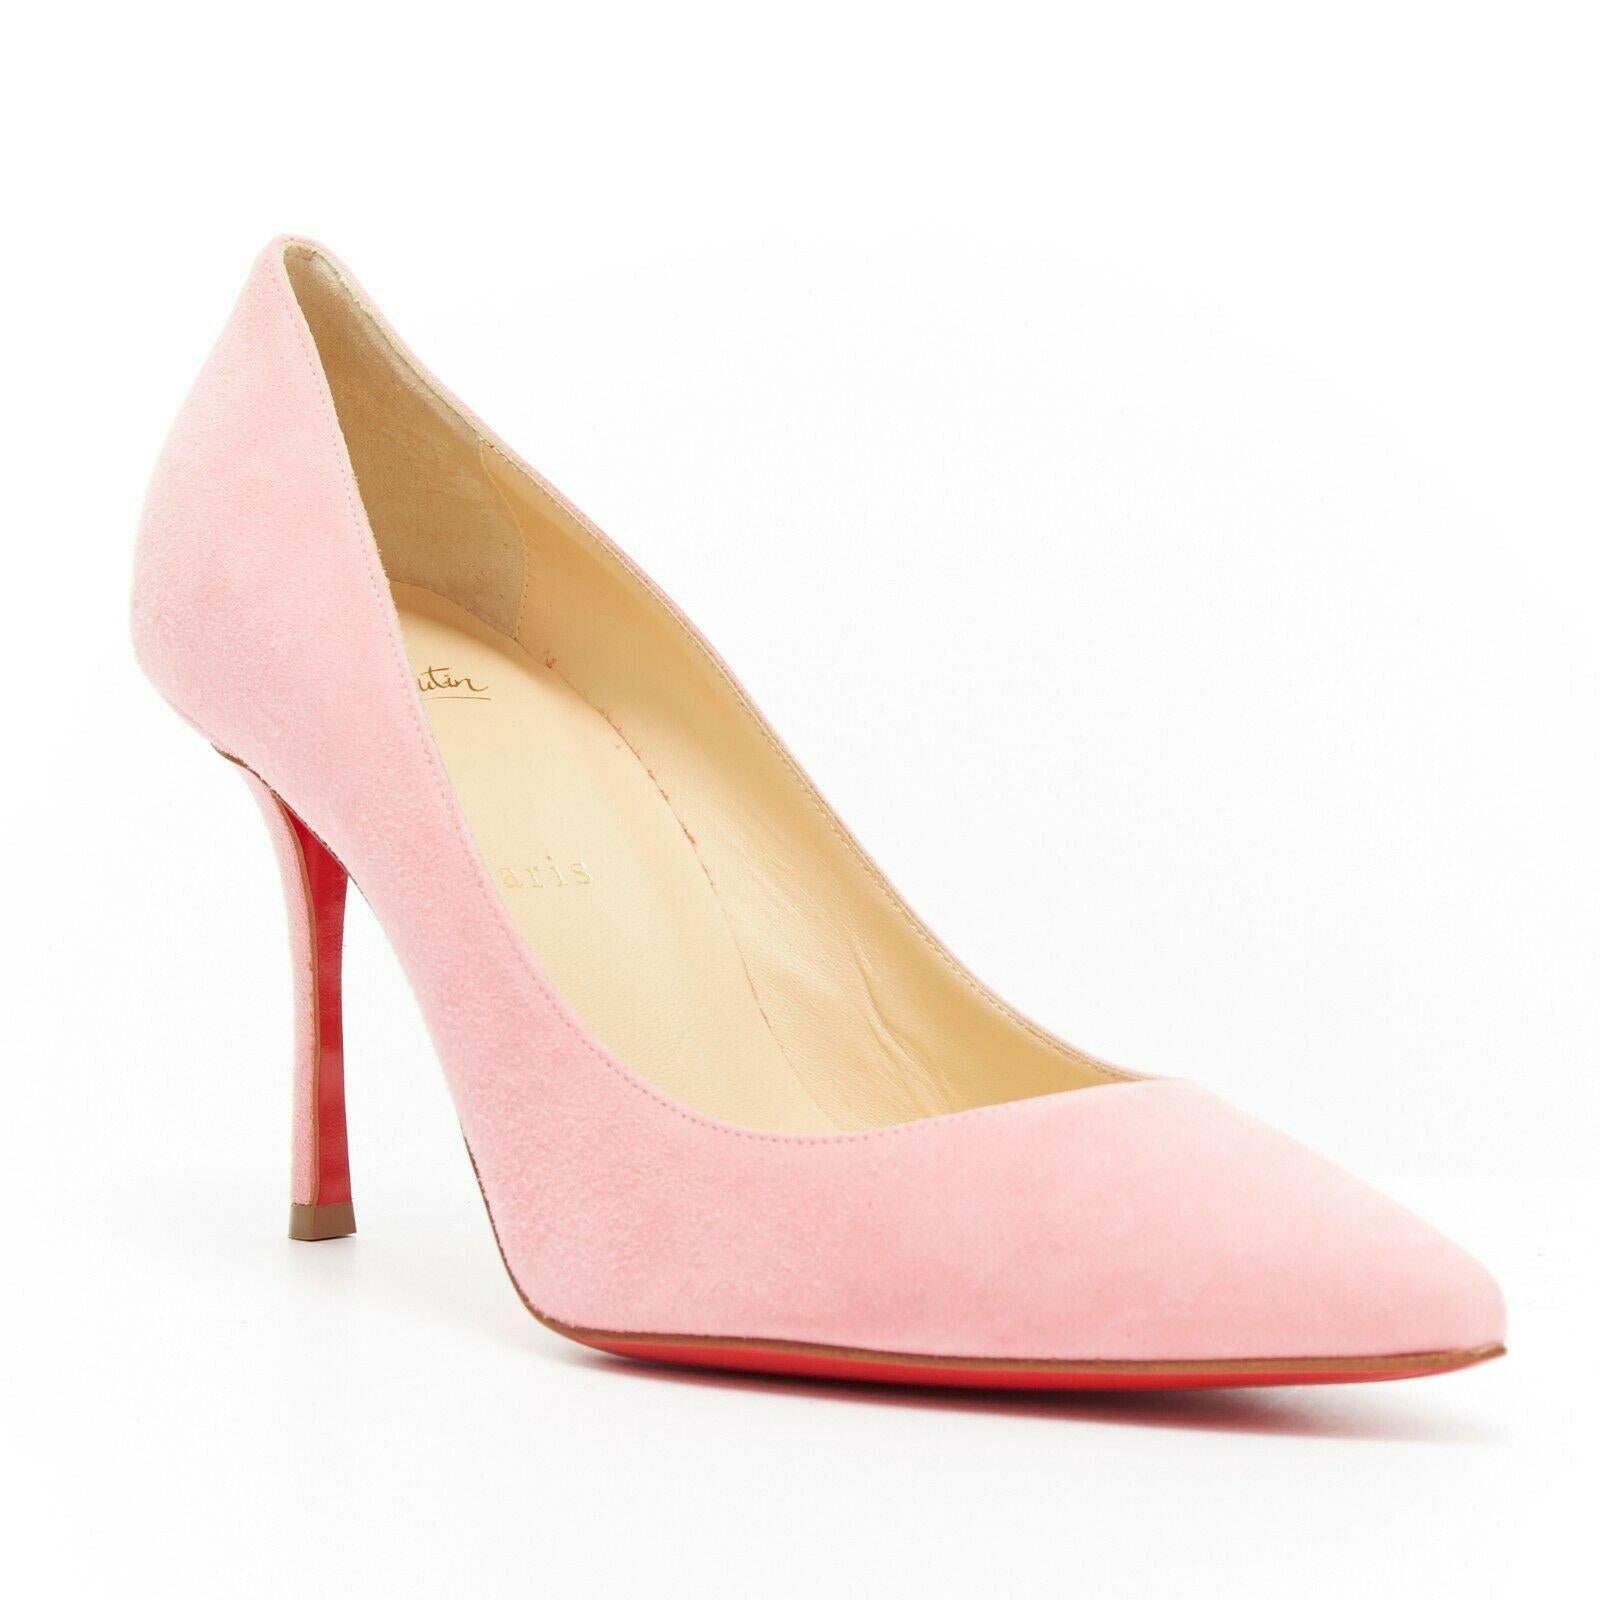 new CHRISTIAN LOUBOUTIN Decoltish 85 Dolly pink suede pointy pigalle pump EU39.5
CHRISTIAN LOUBOUTIN
Decoltish 85. Dolly light pink suede leather upper. 
Pointed toe. Tonal stitching. Stiletto high heel. 
Padded tan leather lining. 
Signature